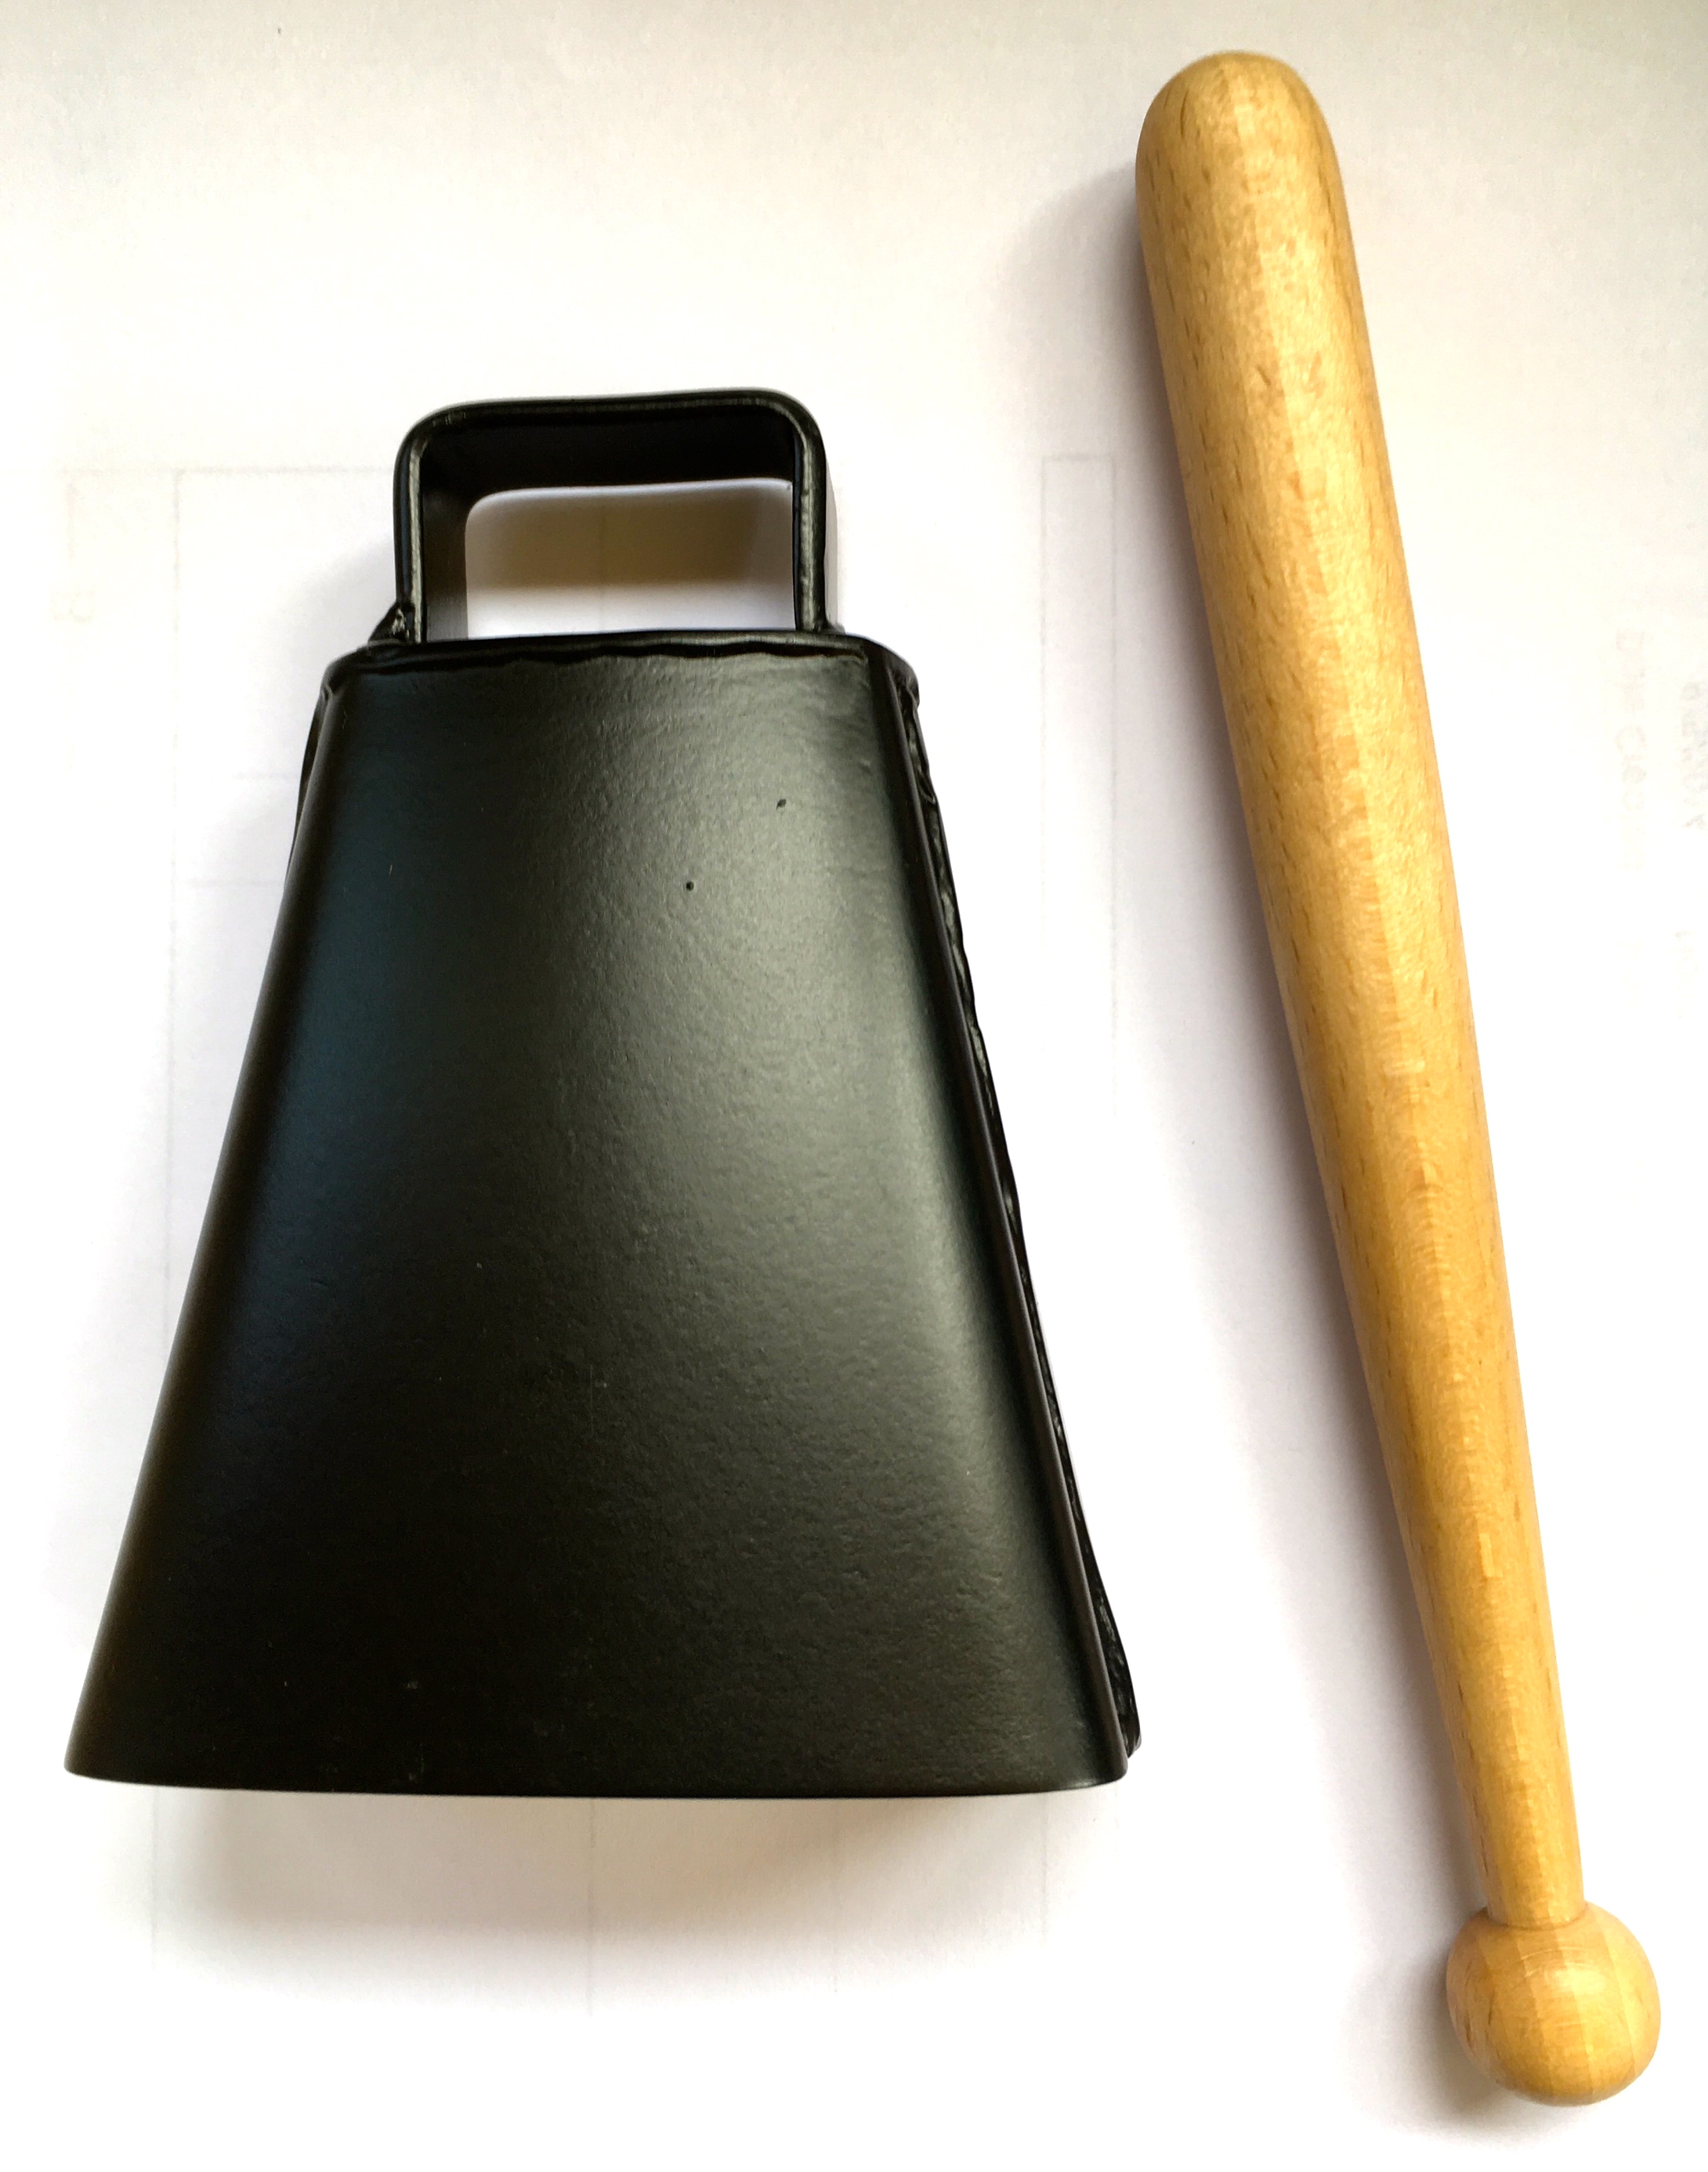 Westco Cow Bell, 3.5 with beater